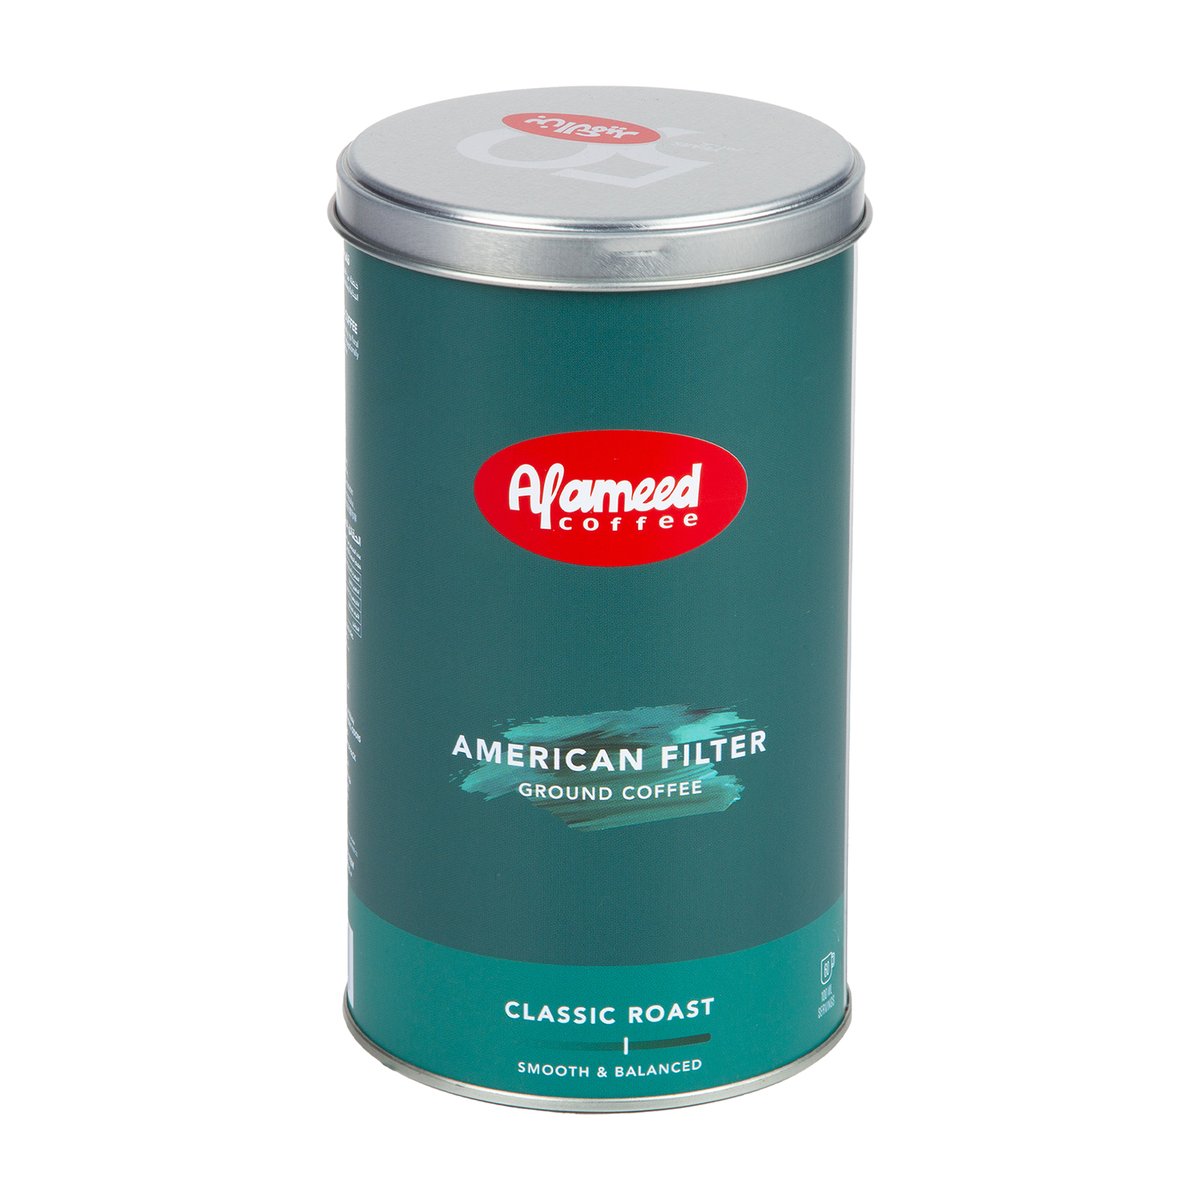 Al Ameed American Filter Ground Coffee 420 g